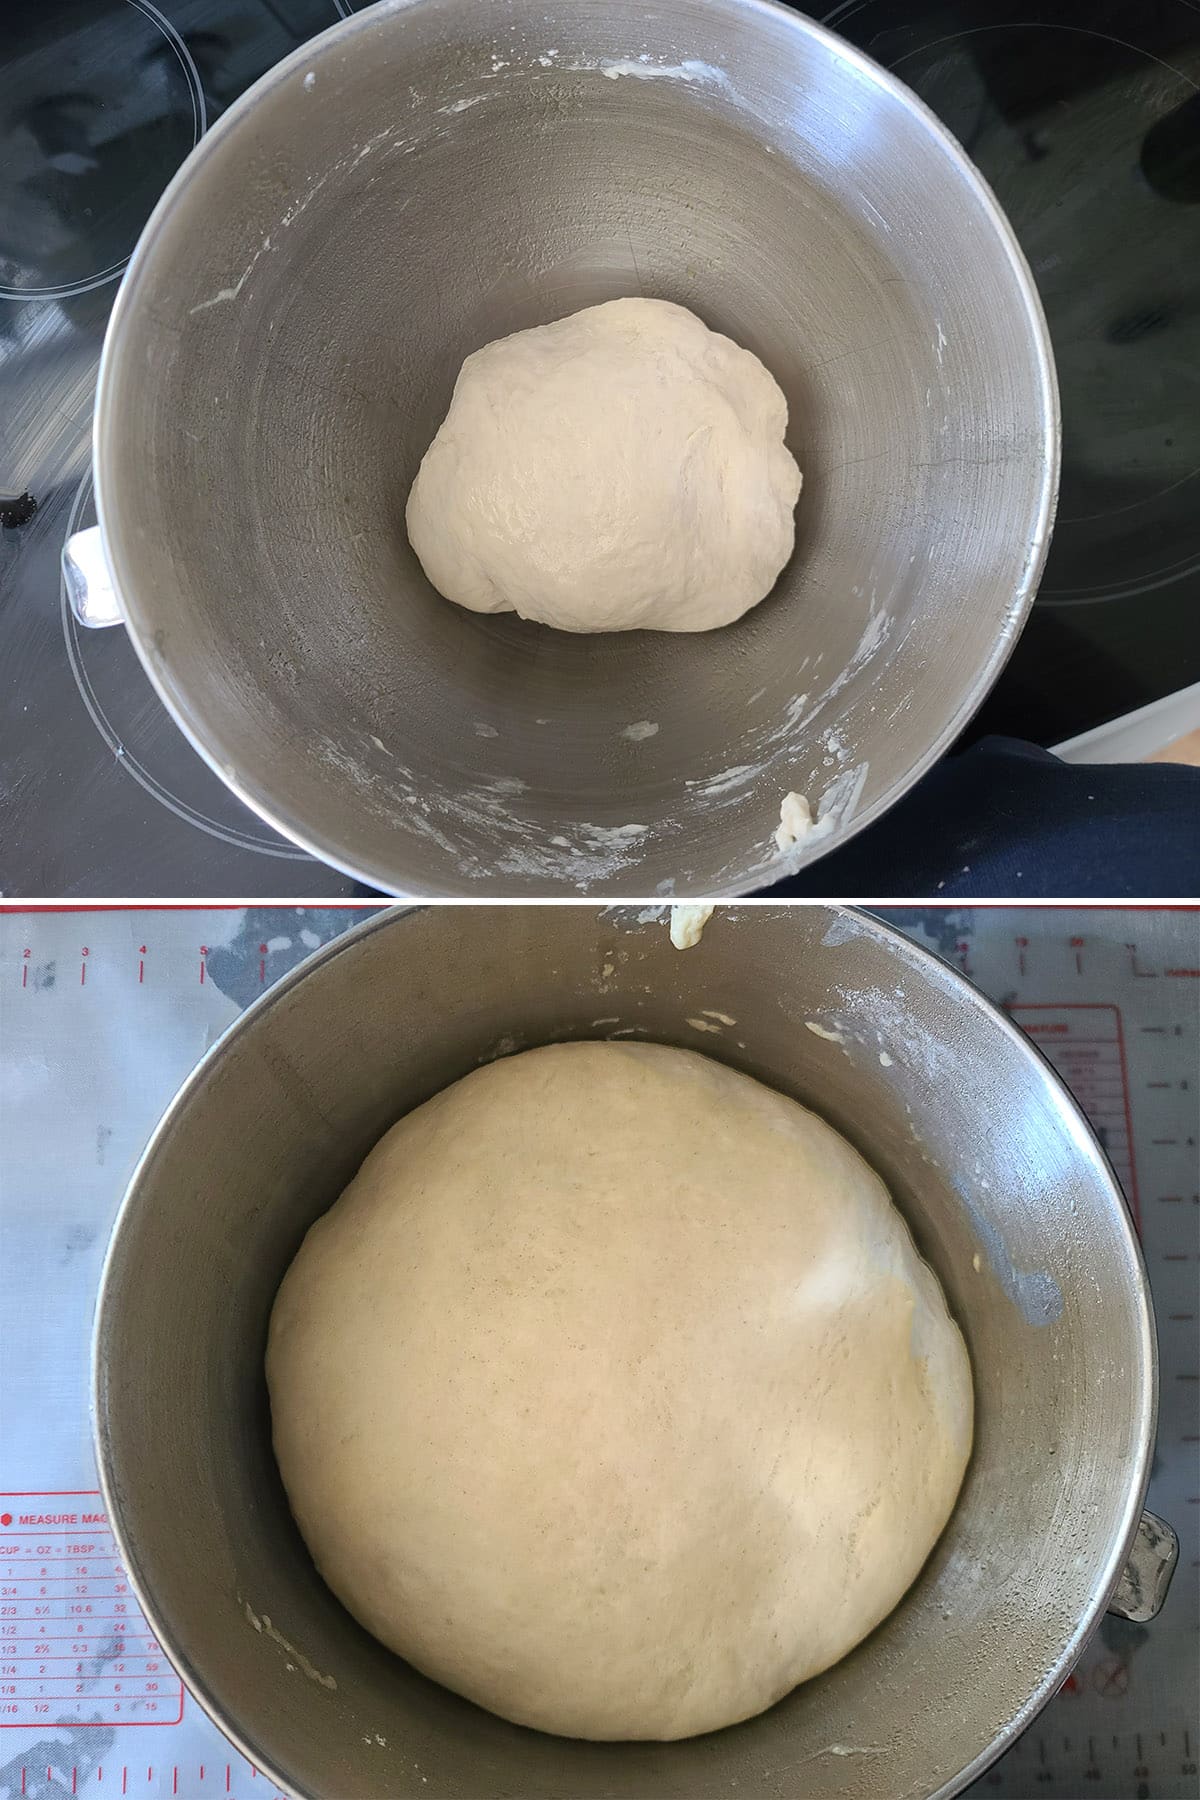 A 2 part image showing the ball of dough before and after doubling in size.